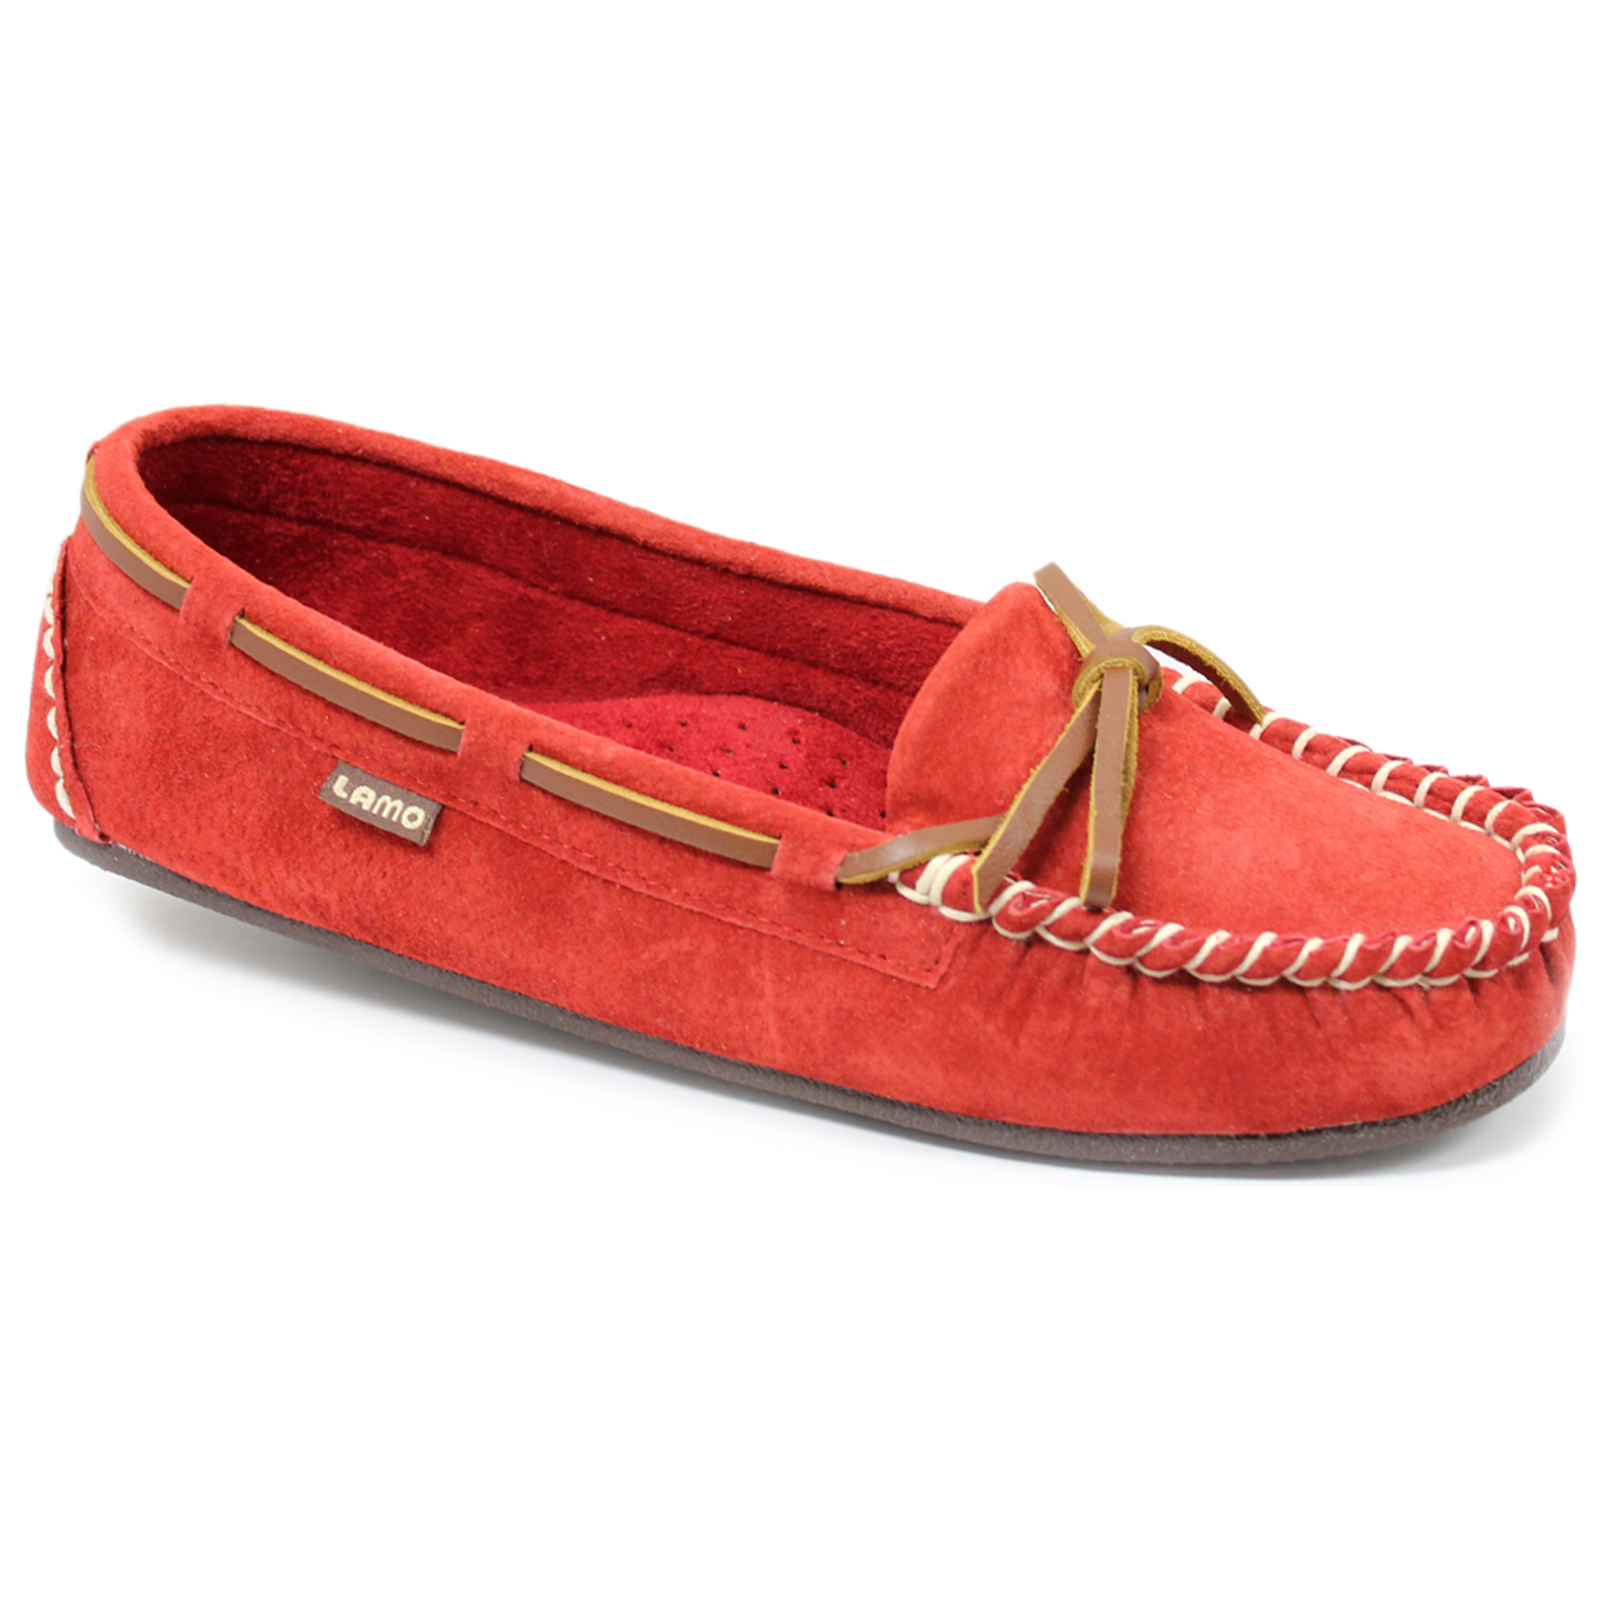 Women's sabrina moc suede red moccasin